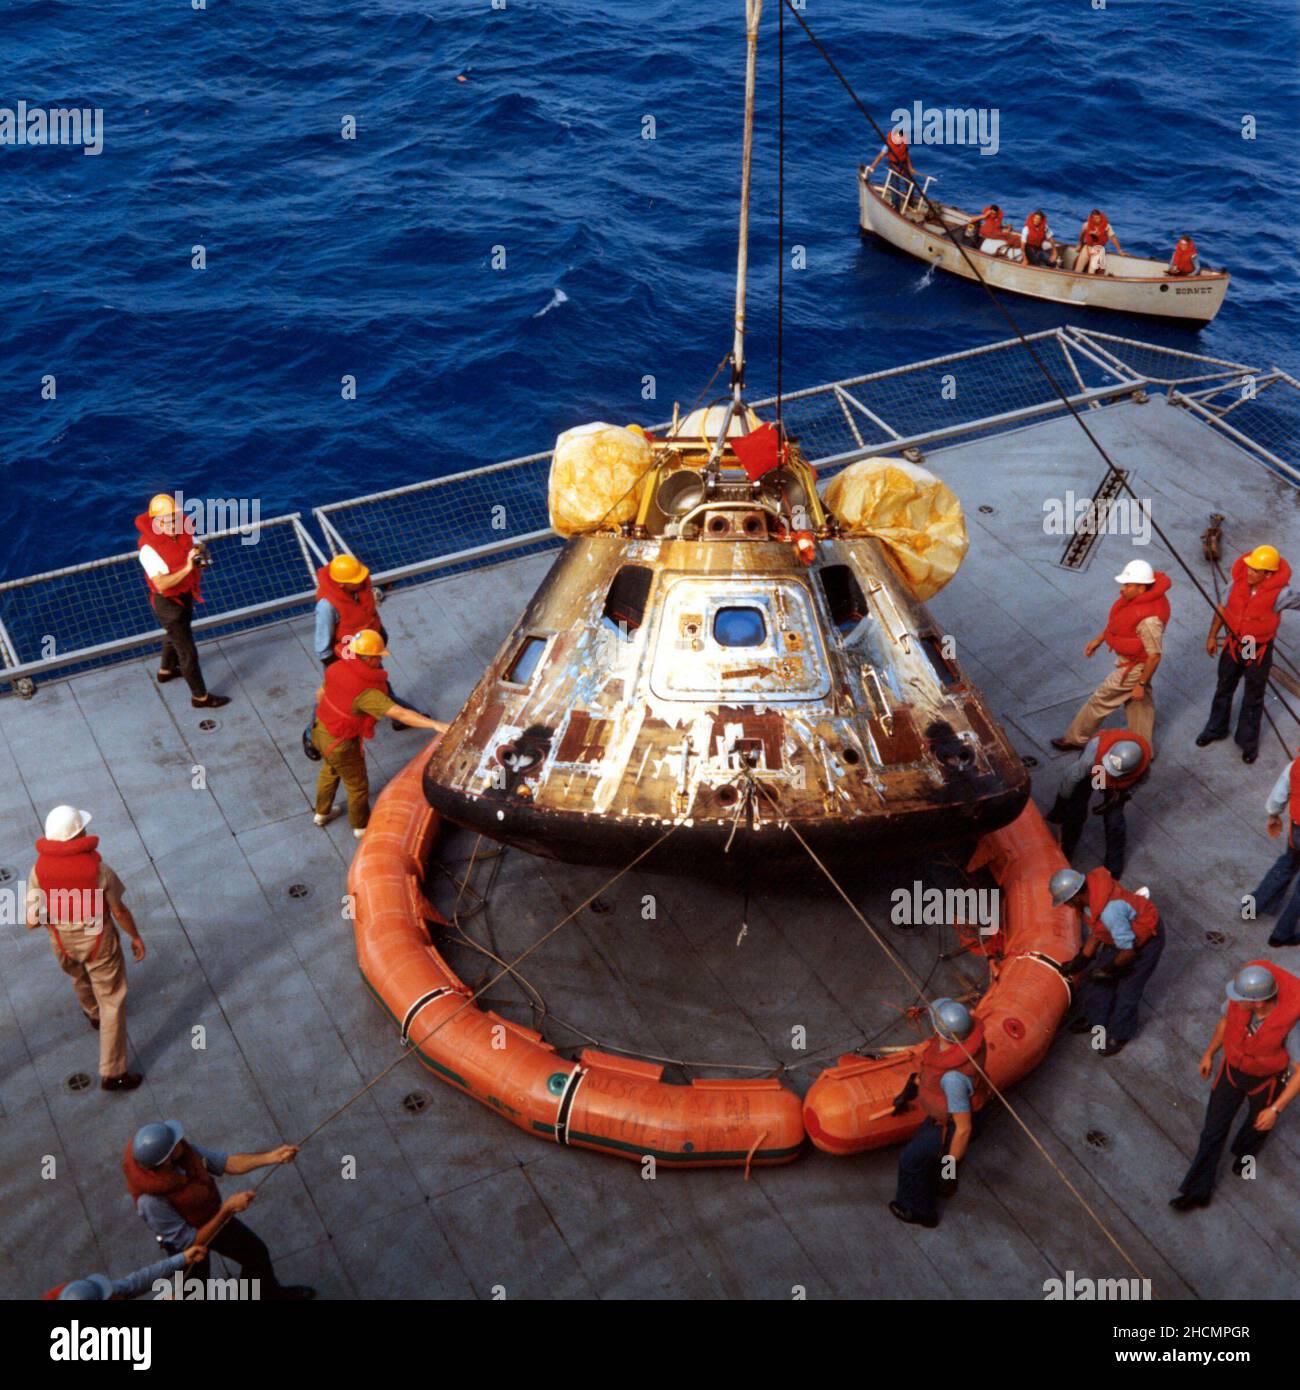 S69-21294 -- The Apollo 11 spacecraft Command Module is photographed being lowered to the deck of the U.S.S. Hornet, prime recovery ship for the historic lunar landing mission. Note the flotation ring attached by Navy divers has been removed from the capsule. Stock Photo